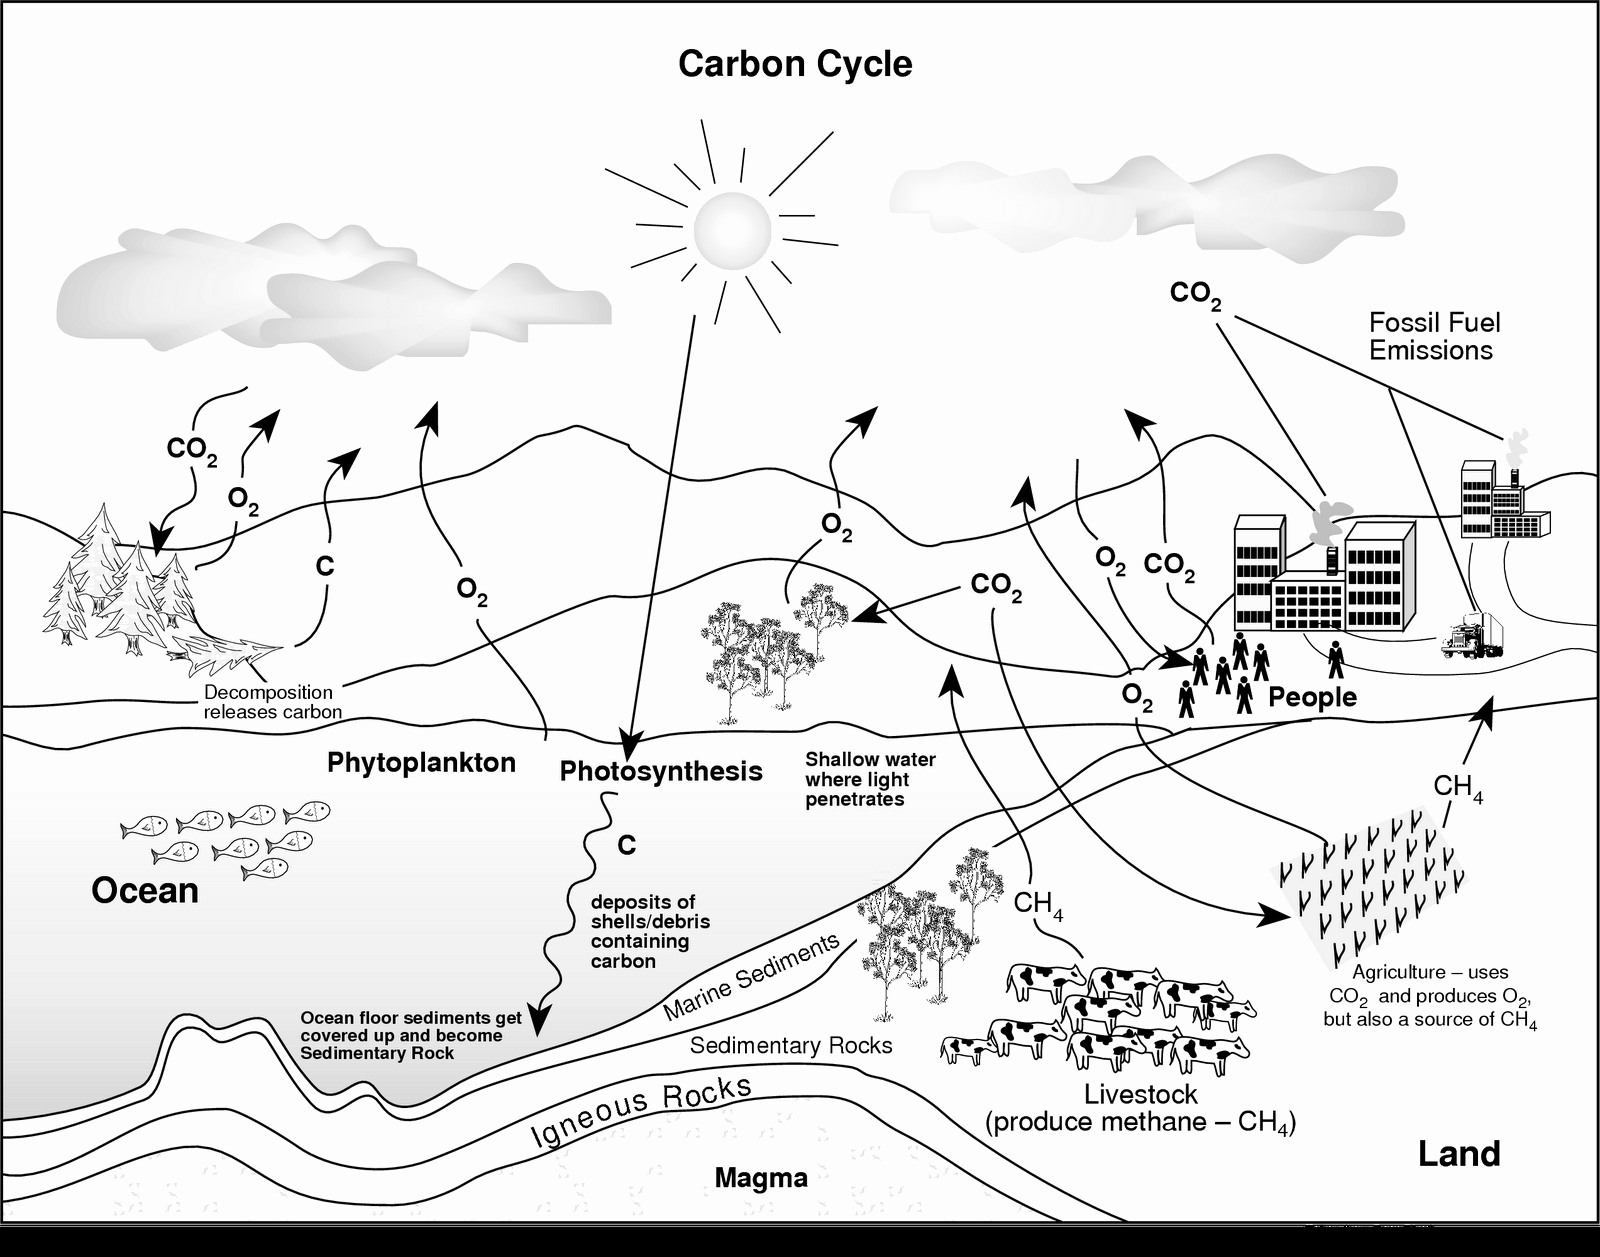 Carbon Cycle Diagram Worksheet Awesome Carbon Cycle Diagram Blank Saferbrowser Yahoo Image